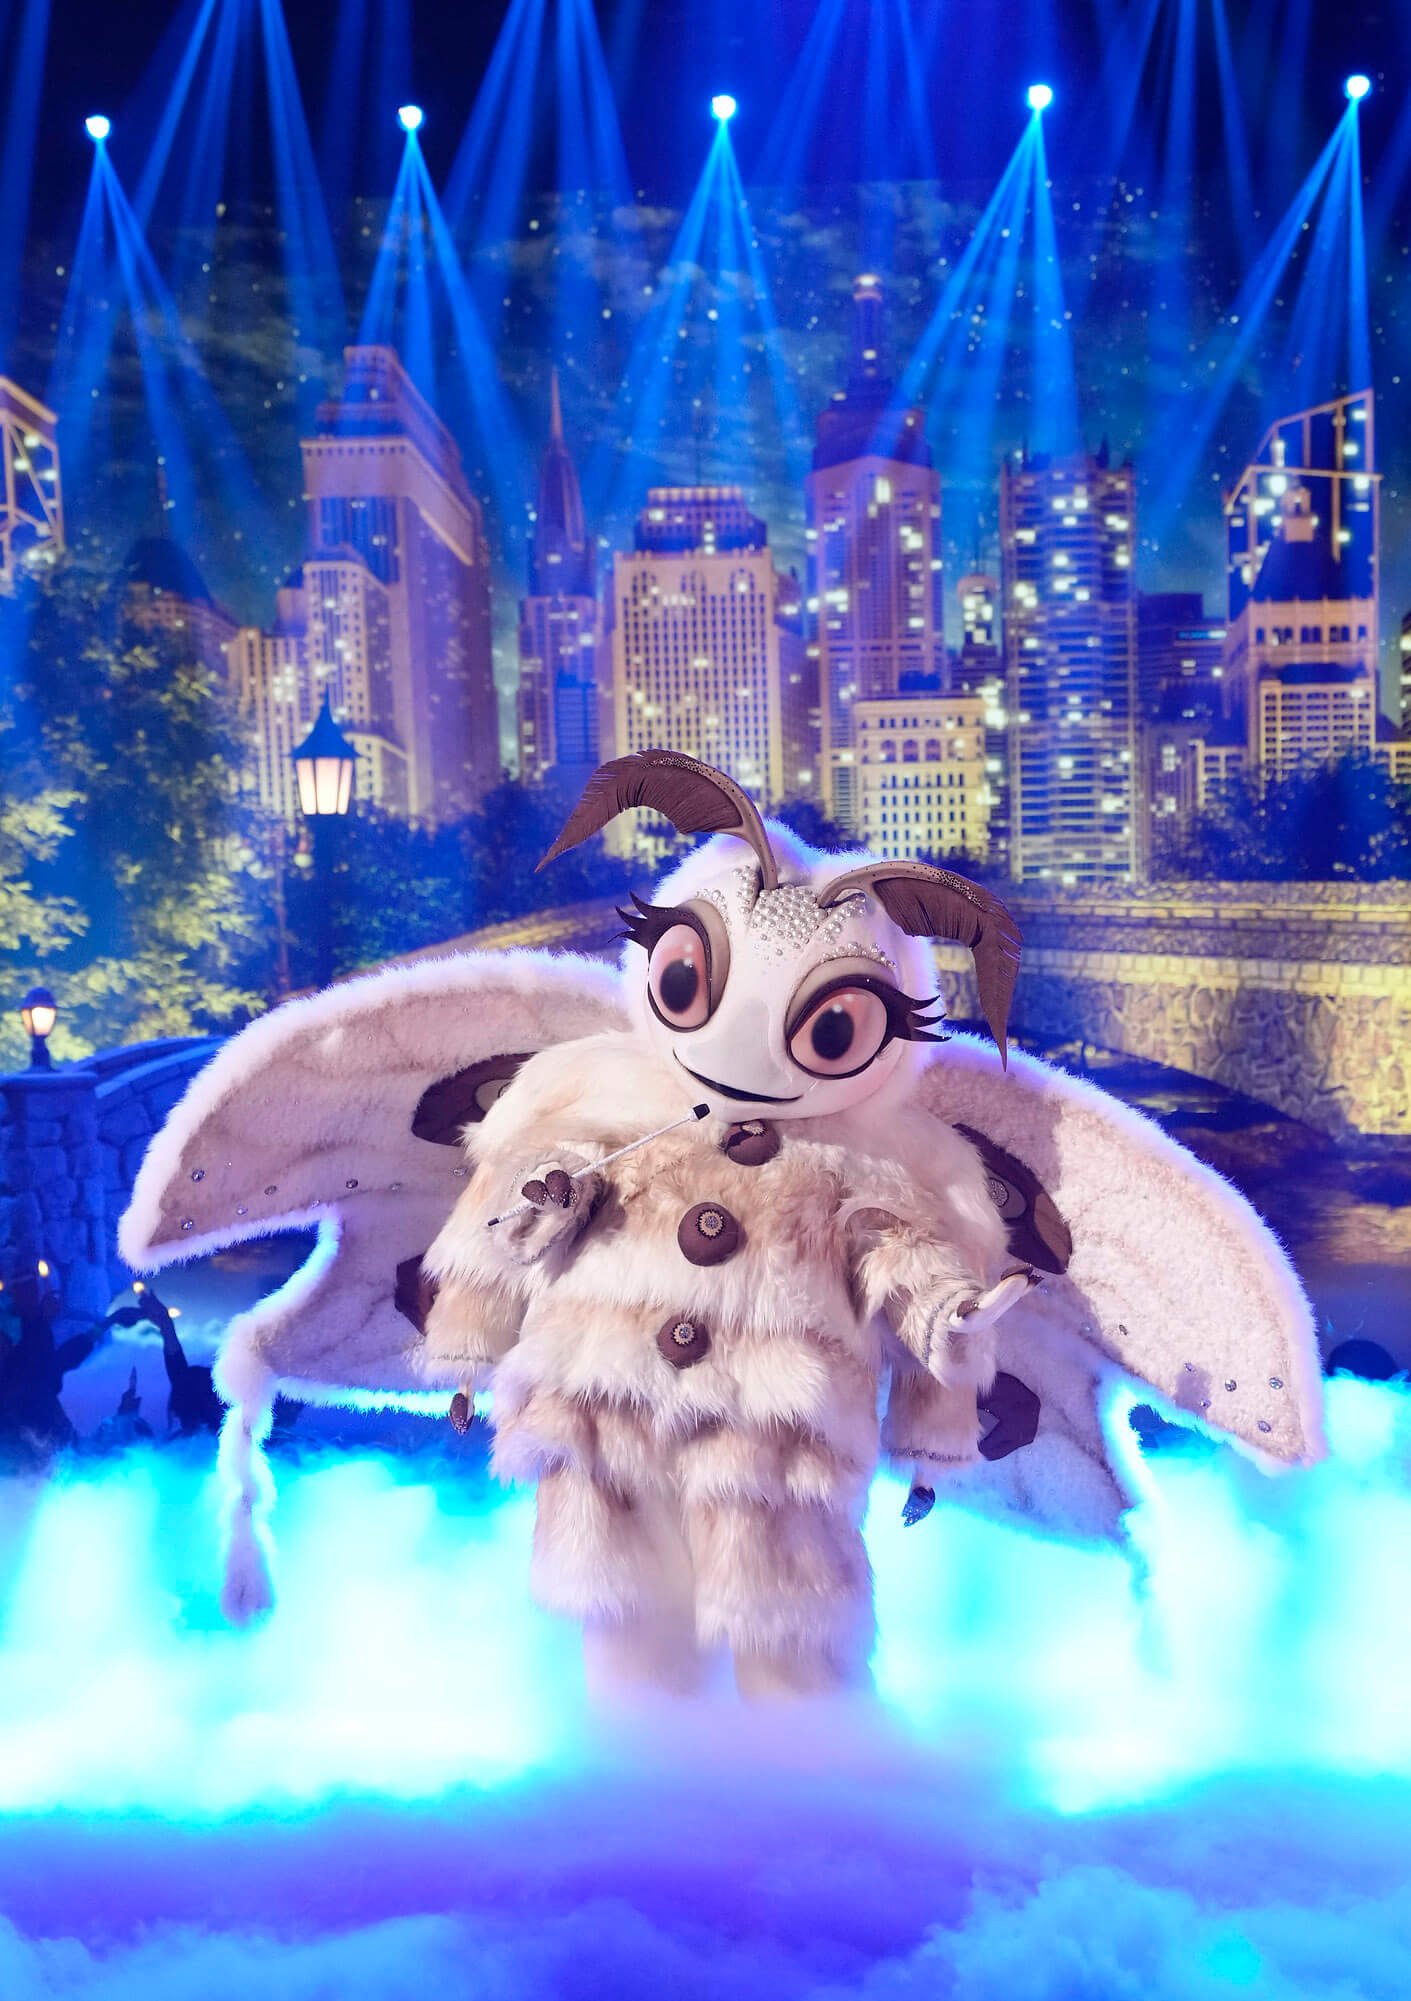 'The Masked Singer' Season 11 Group C singer Poodle Moth on stage illuminated by blue light with a city background 